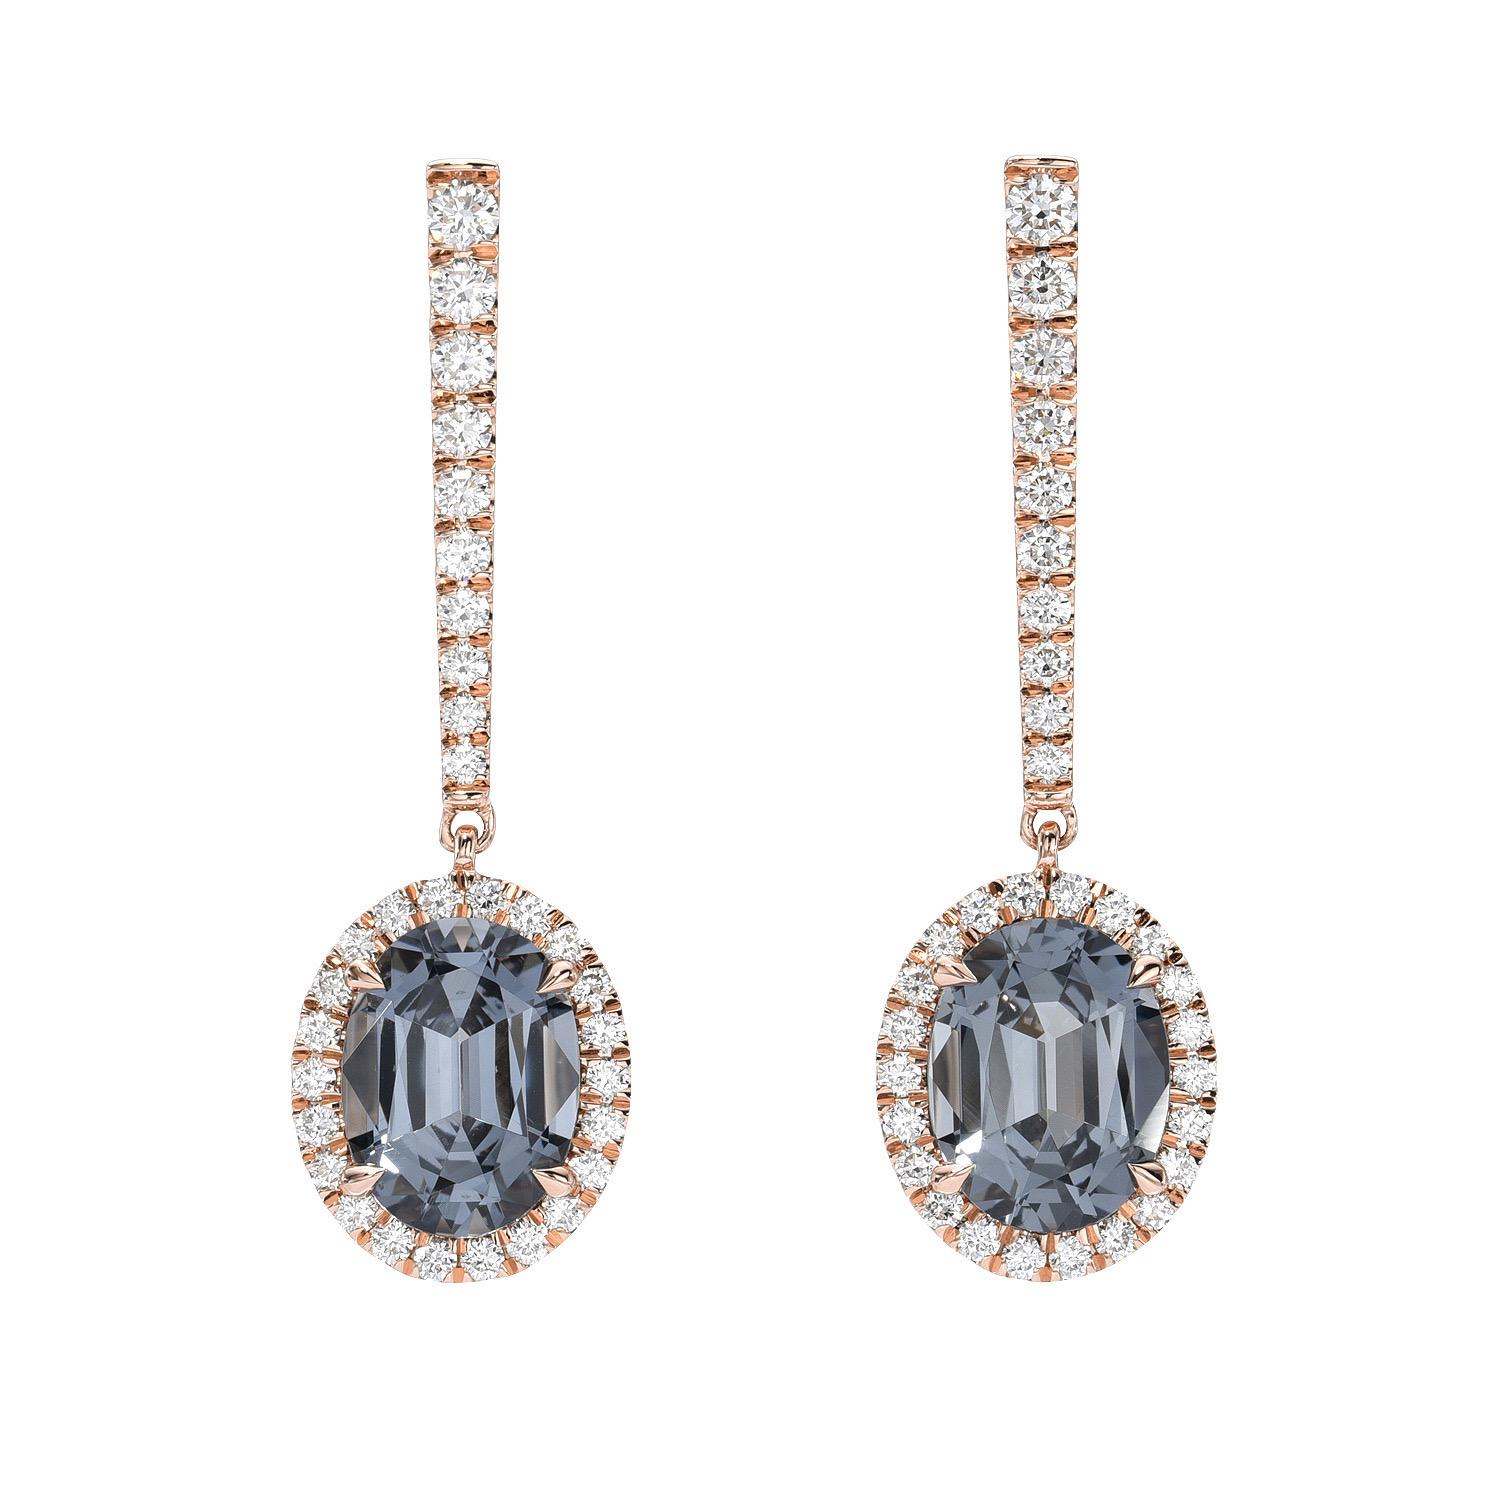 Exclusive pair of 3.71 carat Grey Spinel oval, 18K rose gold earrings, decorated with a total of 0.67 carat round brilliant diamonds.
Returns are accepted and paid by us within 7 days of delivery.

Please FOLLOW the MERKABA storefront to be the